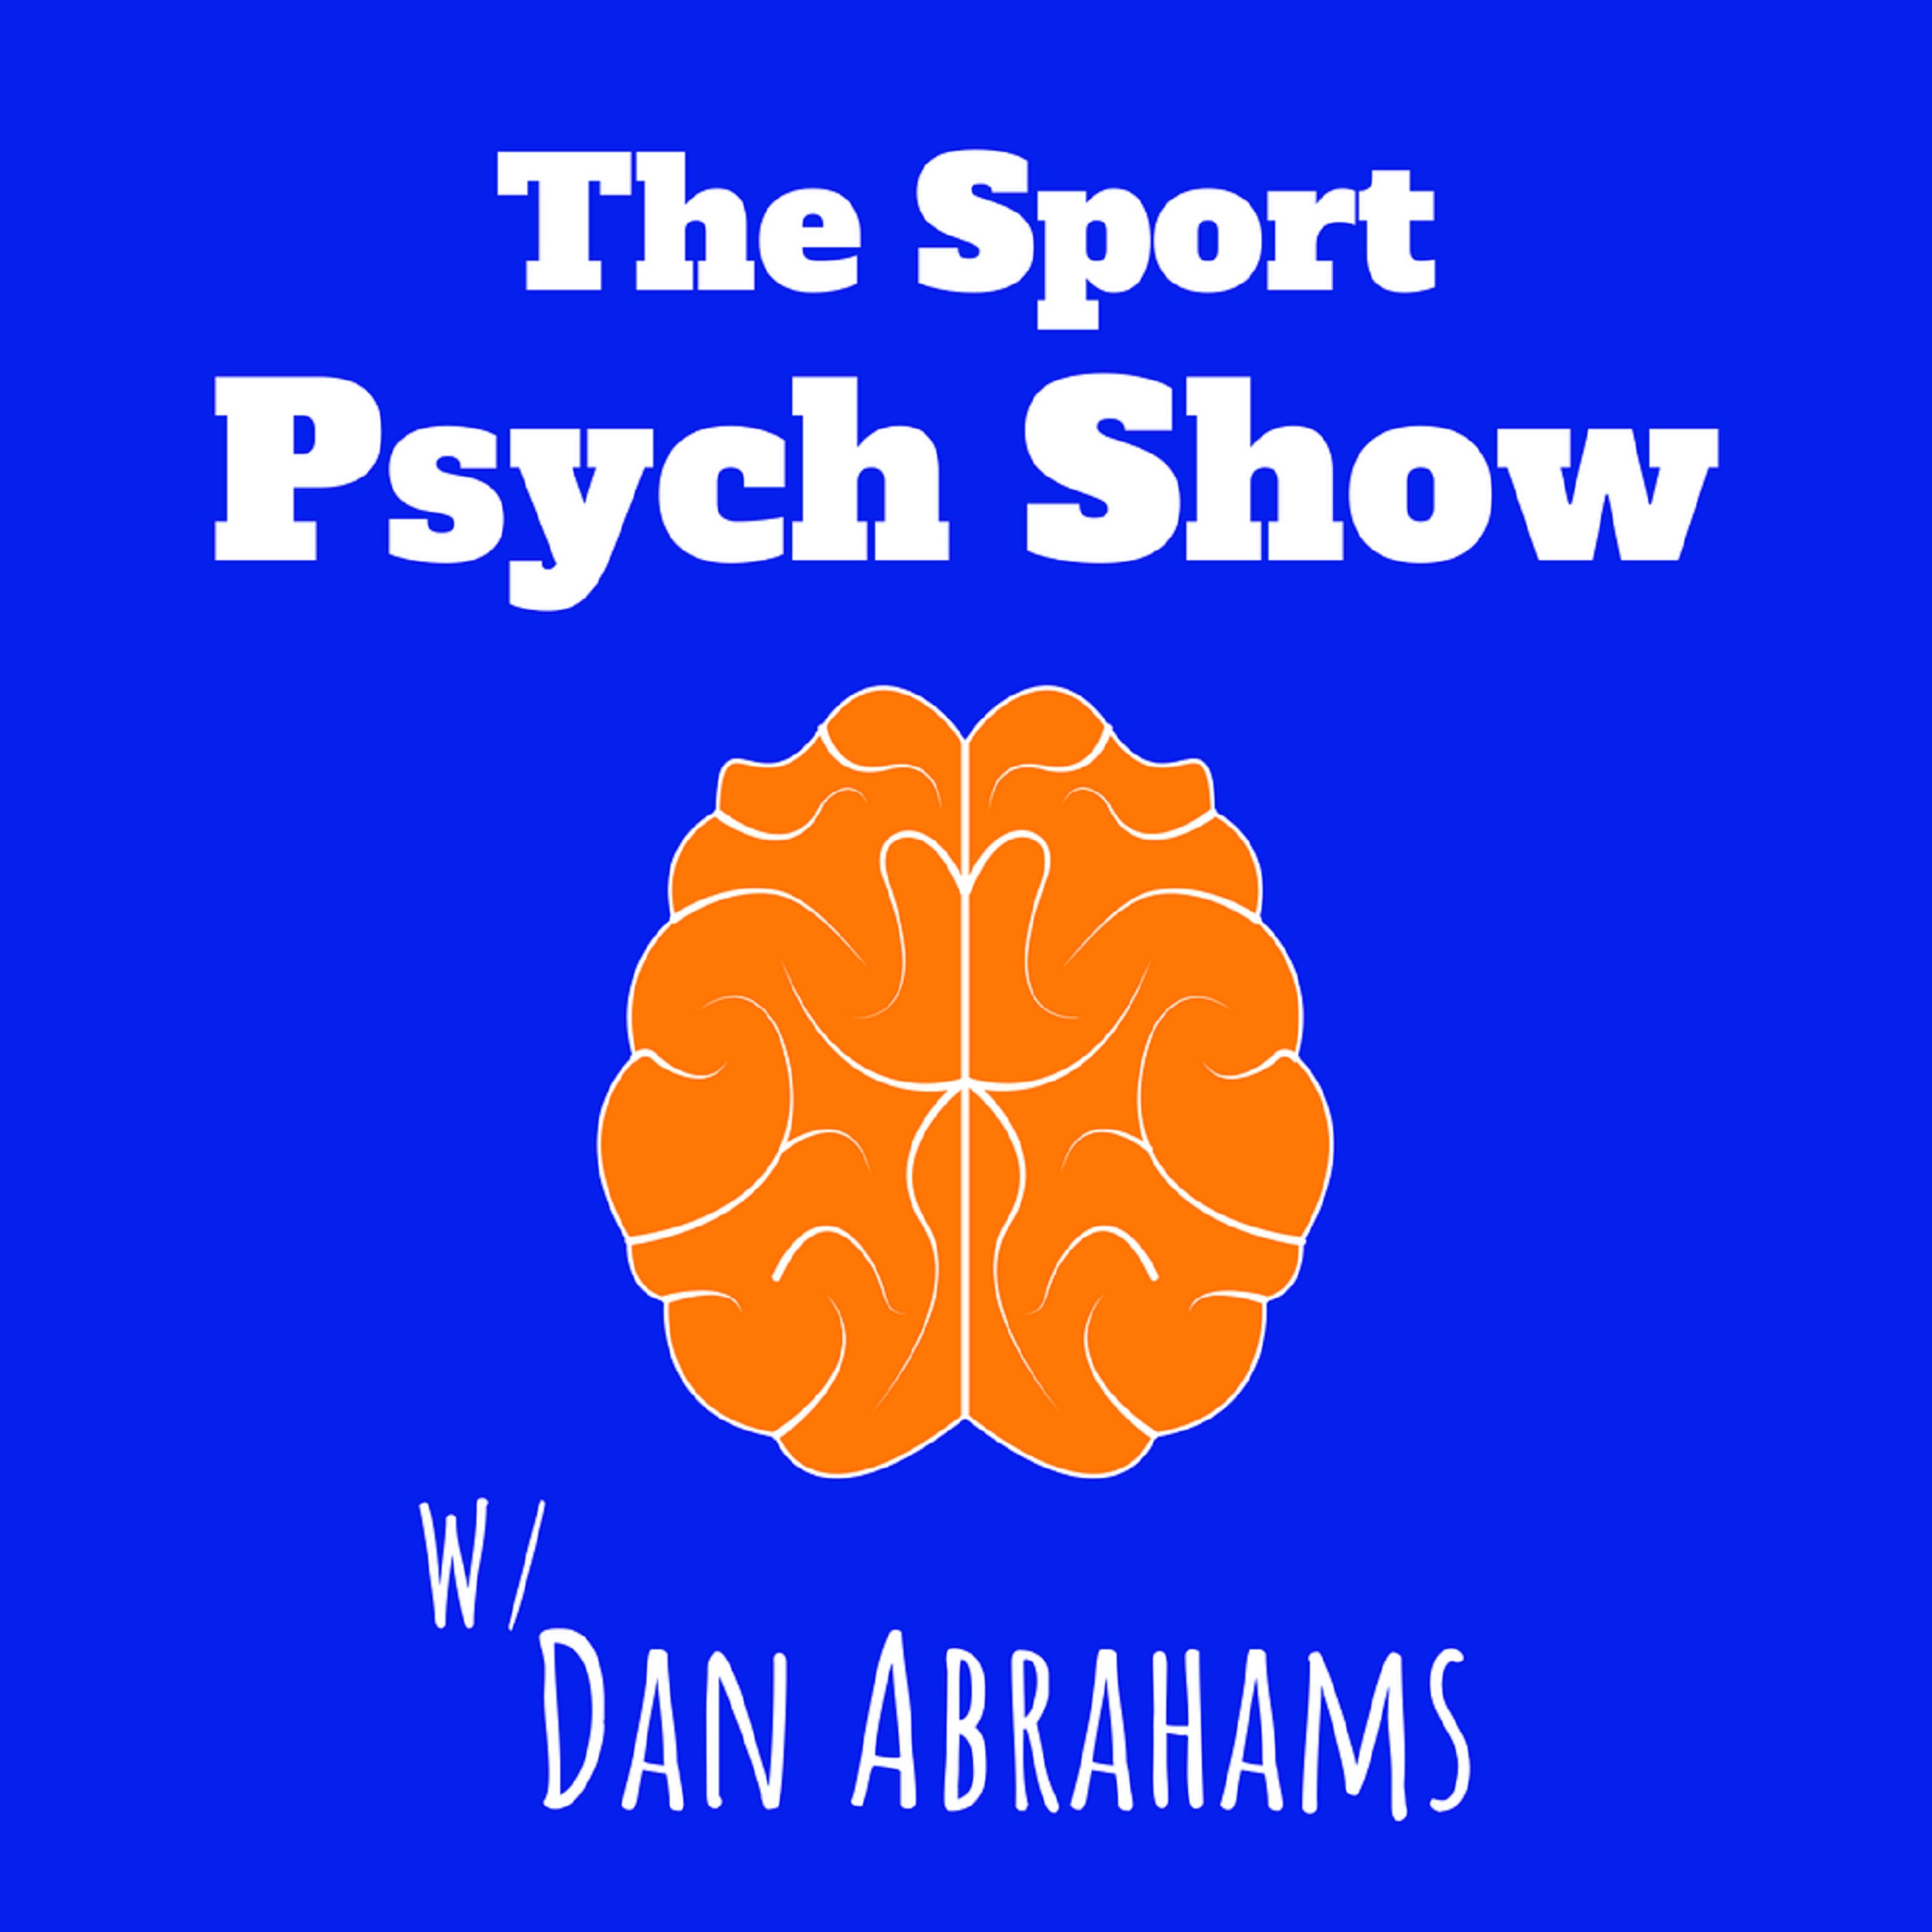 The Sport Psych Show - Superstitions in Sport: What’s Luck got to do with it?